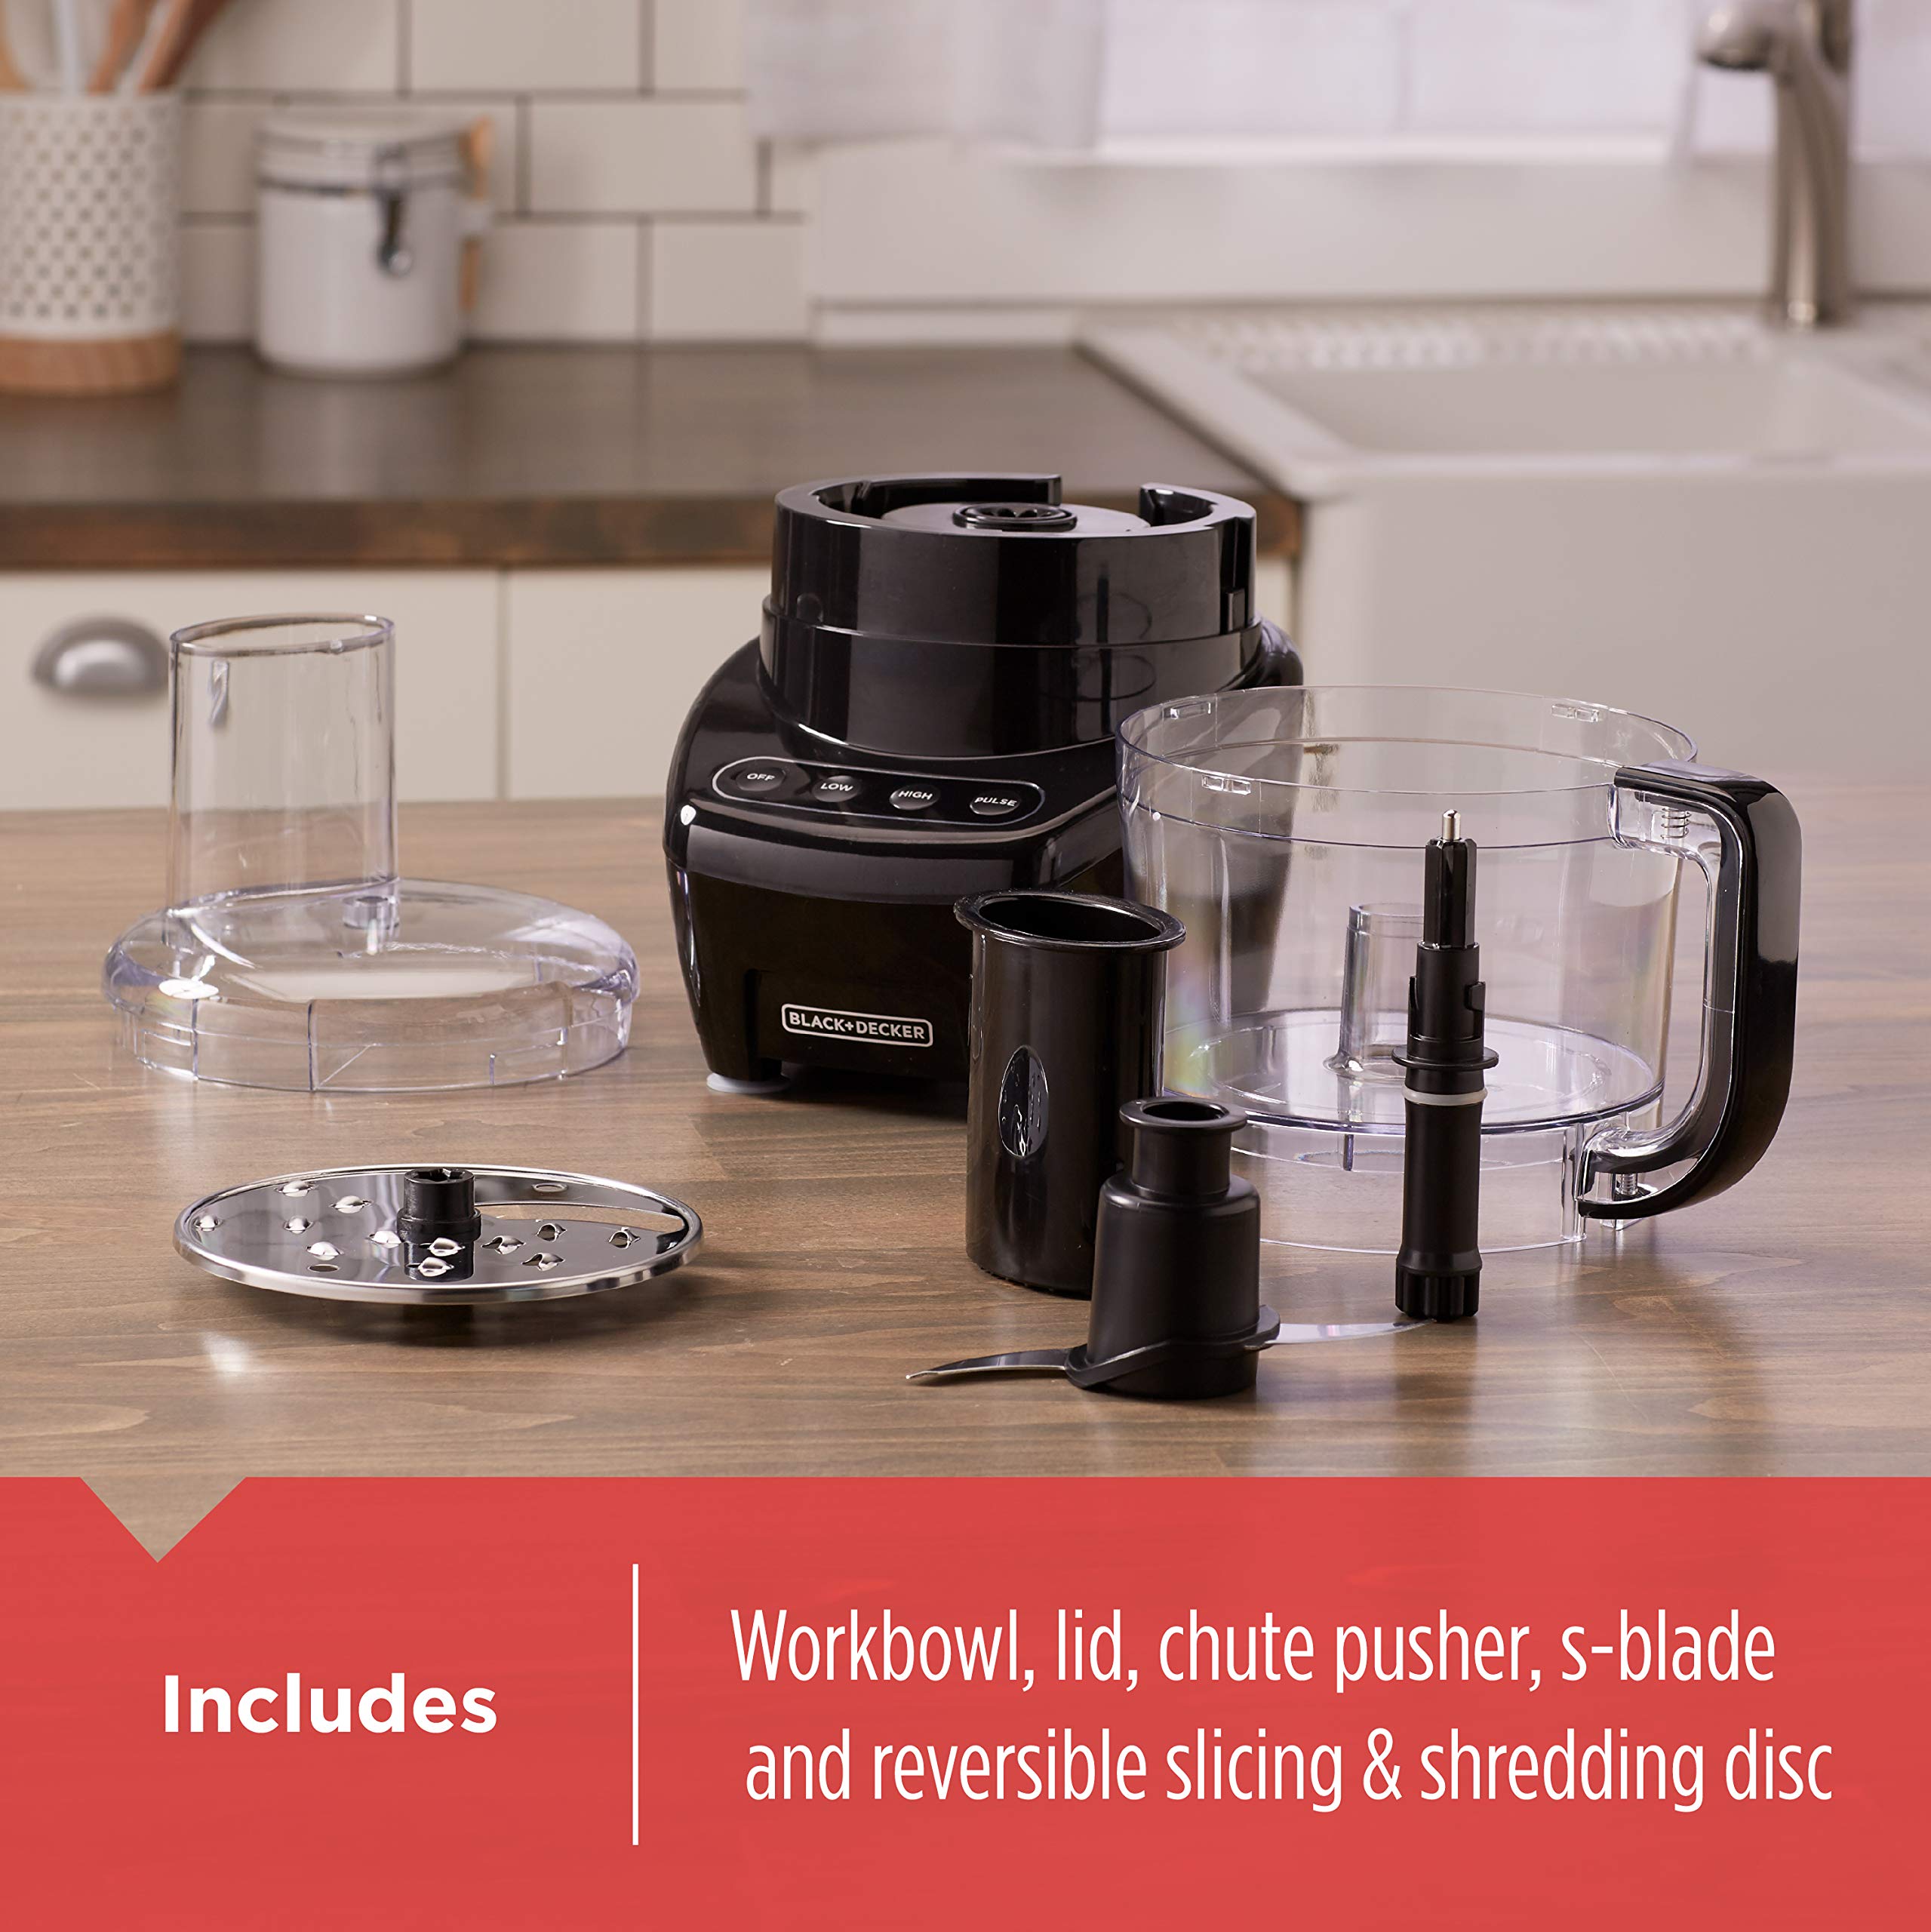 BLACK+DECKER 3-in-1 Easy Assembly 8-Cup Food Processor, Black